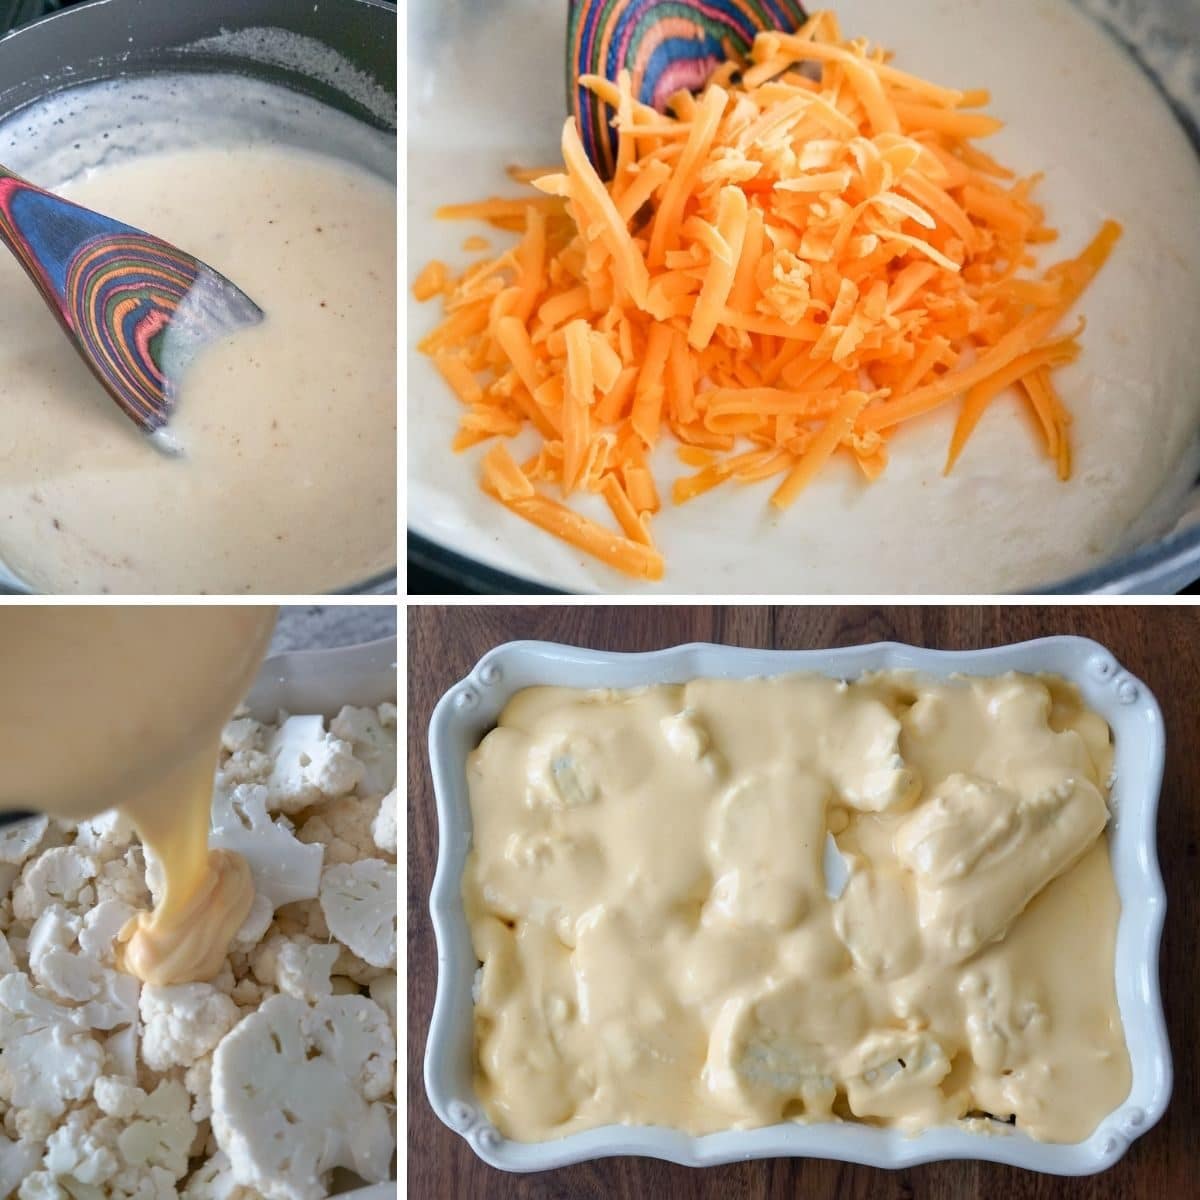 How to make cauliflower au gratin in by-step photographs. Making the cream sauce, adding the cheese, pouring cheese sauce on top of sliced cauliflower, and baking the cauliflower casserole.